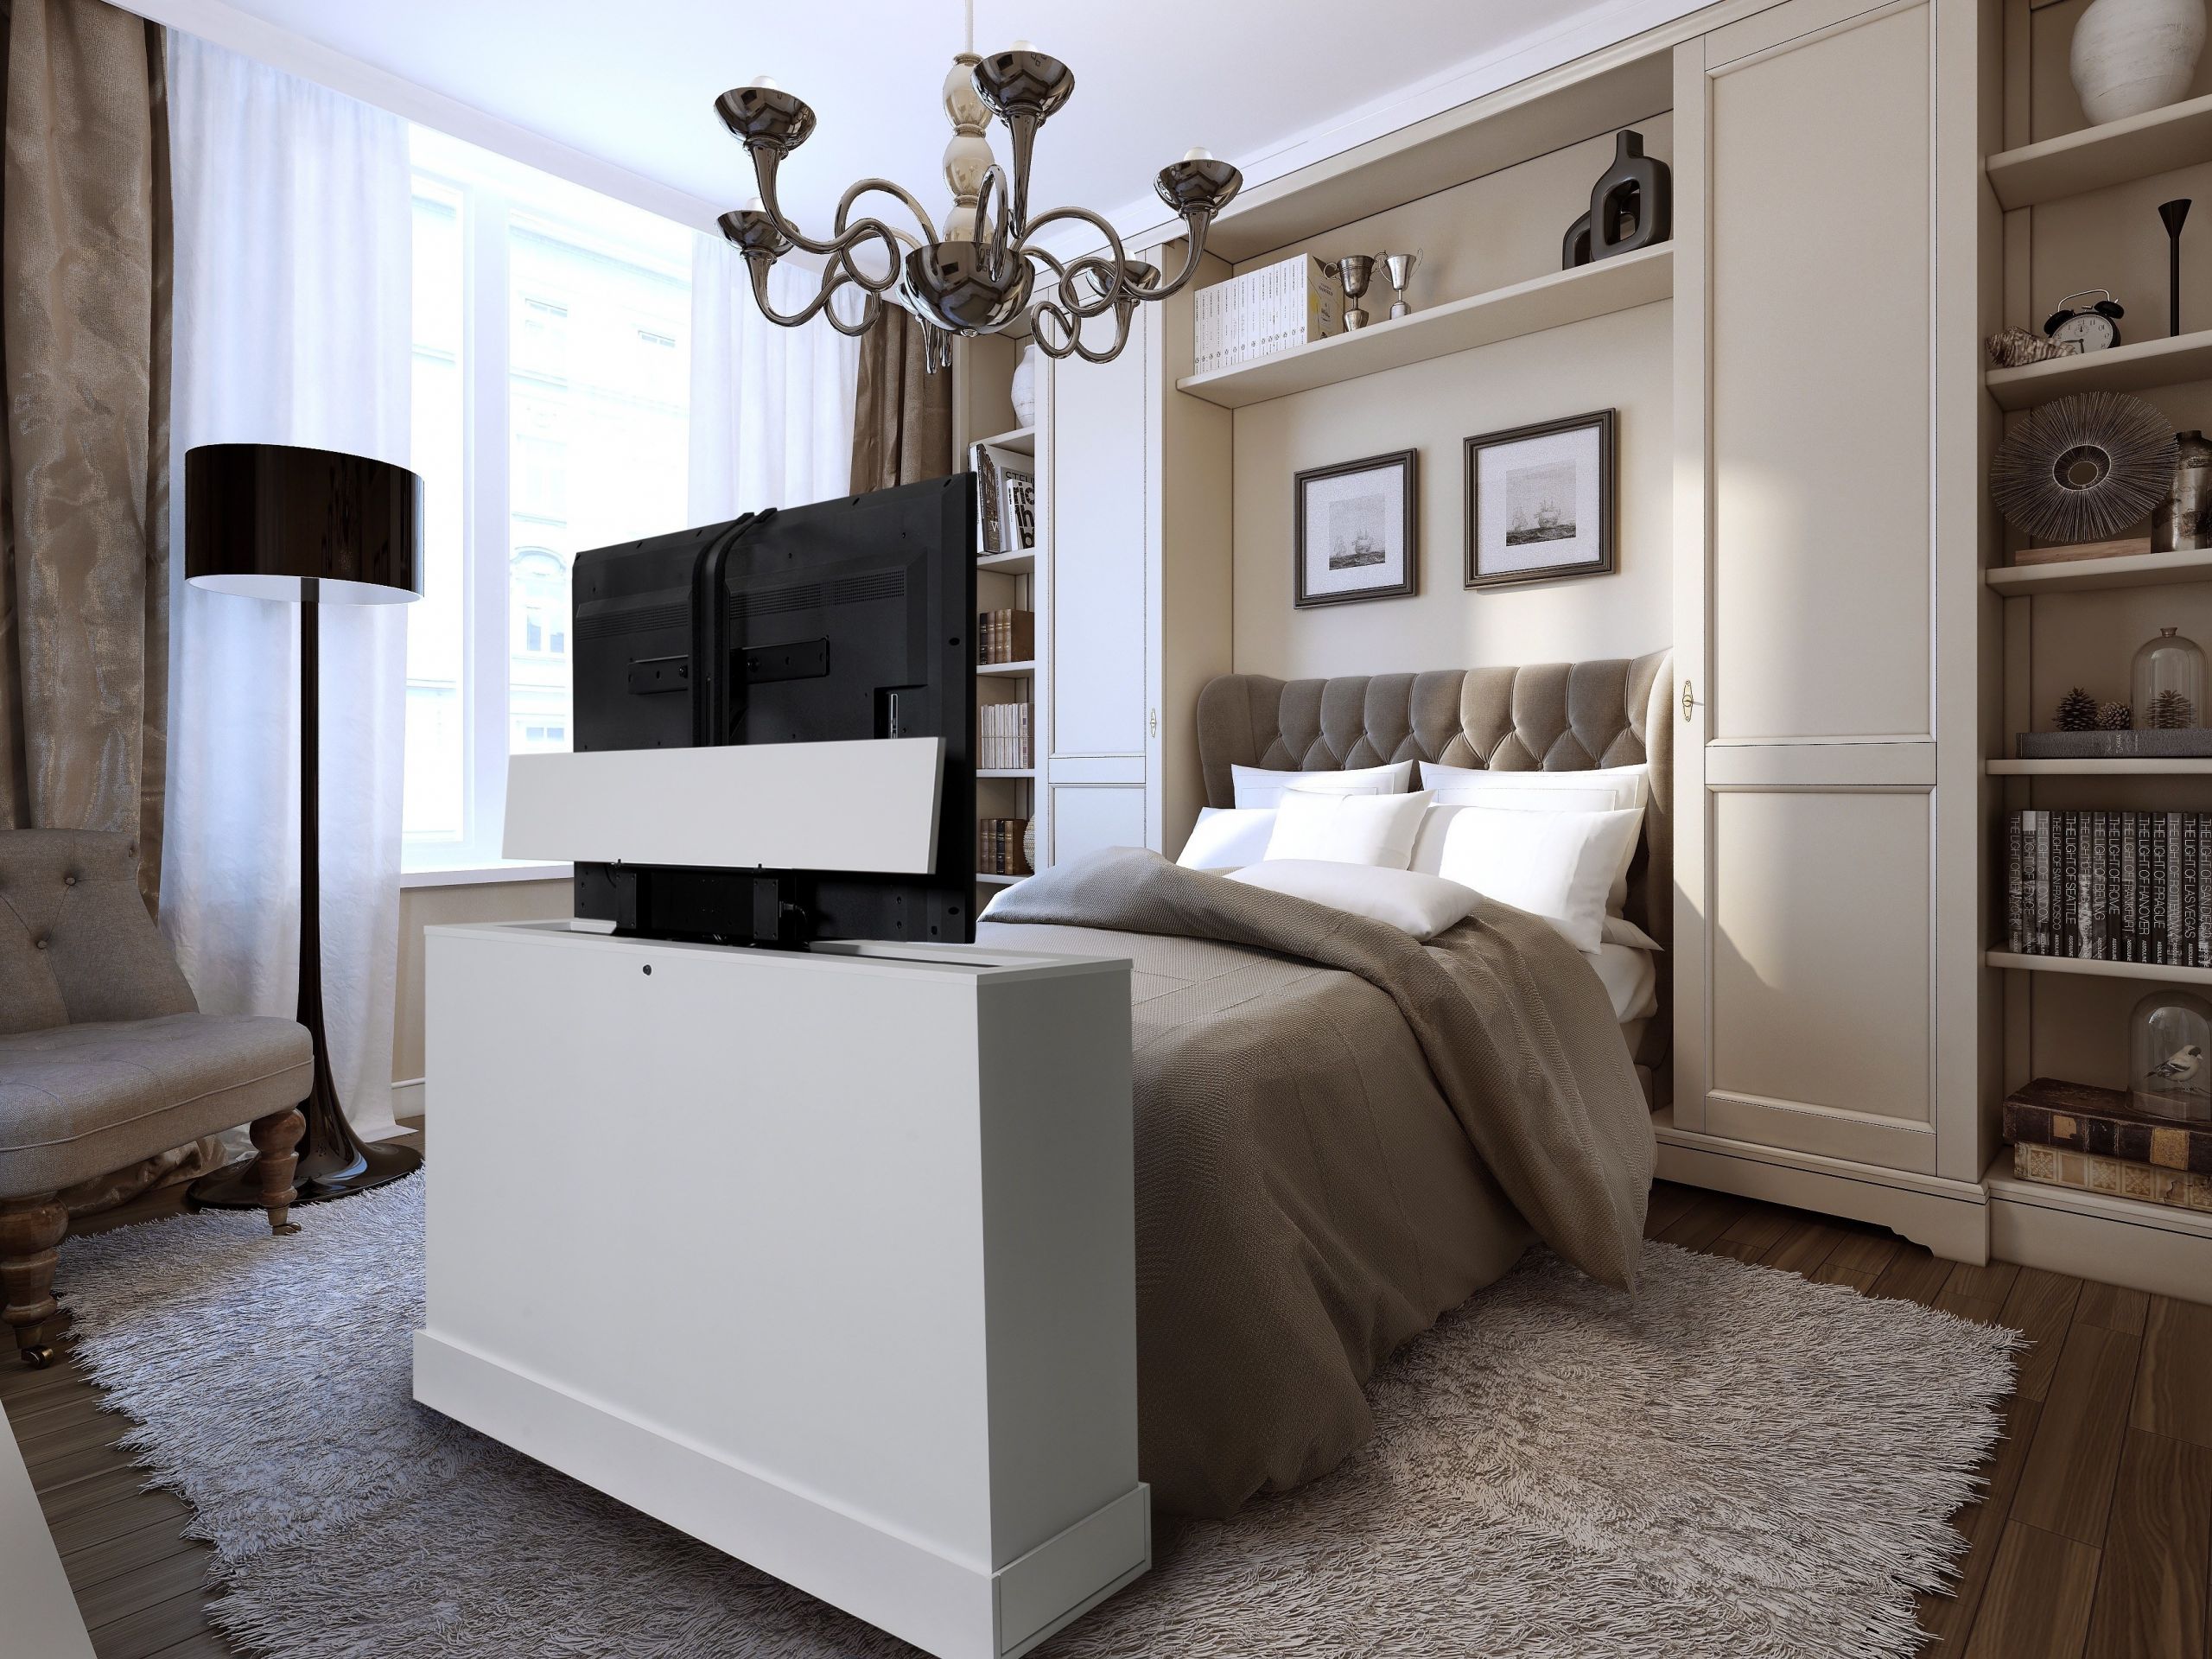 Bedroom Tv Cabinet
 End Bed Tv Lift Cabinets For Flat Screens – Madison Art